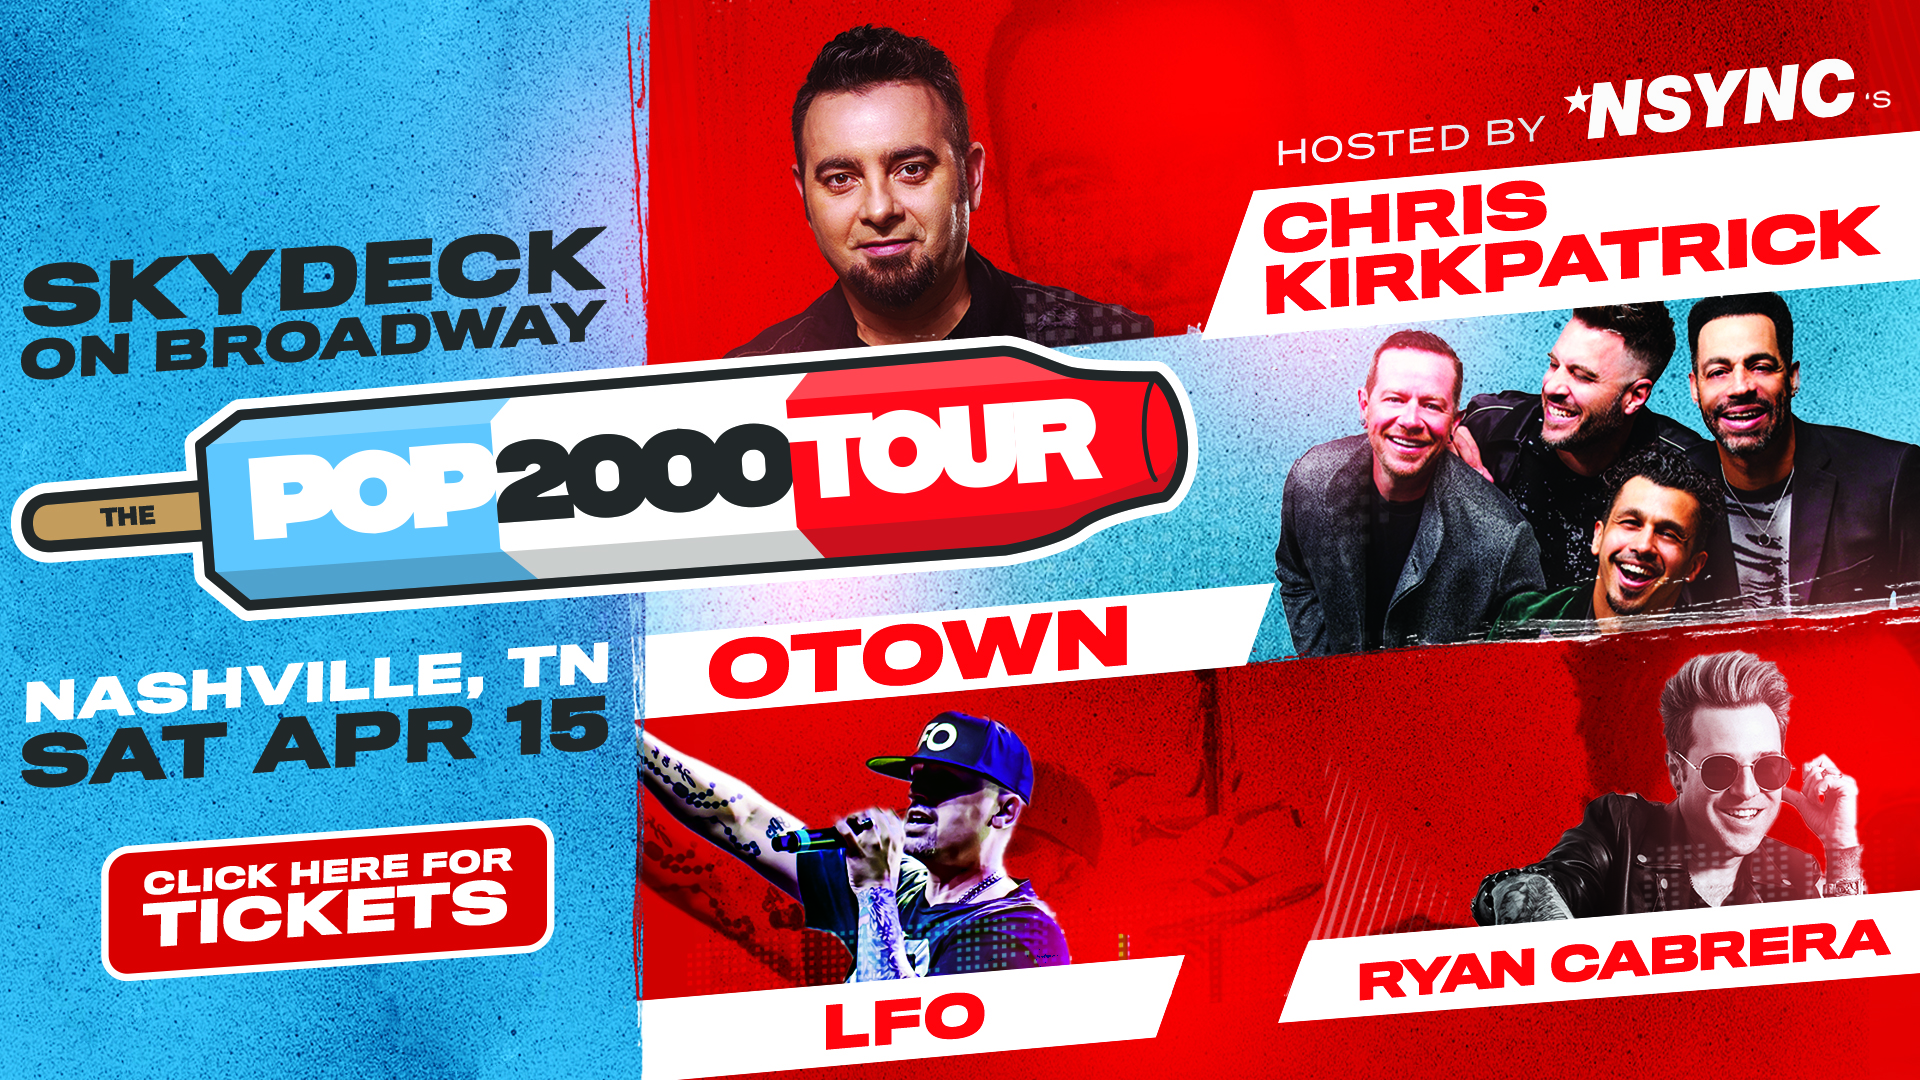 POP 2000 Tour hosted by Chris Kirkpatrick of *NSYNC, with O-Town, Ryan Cabrera, & LFO - hero